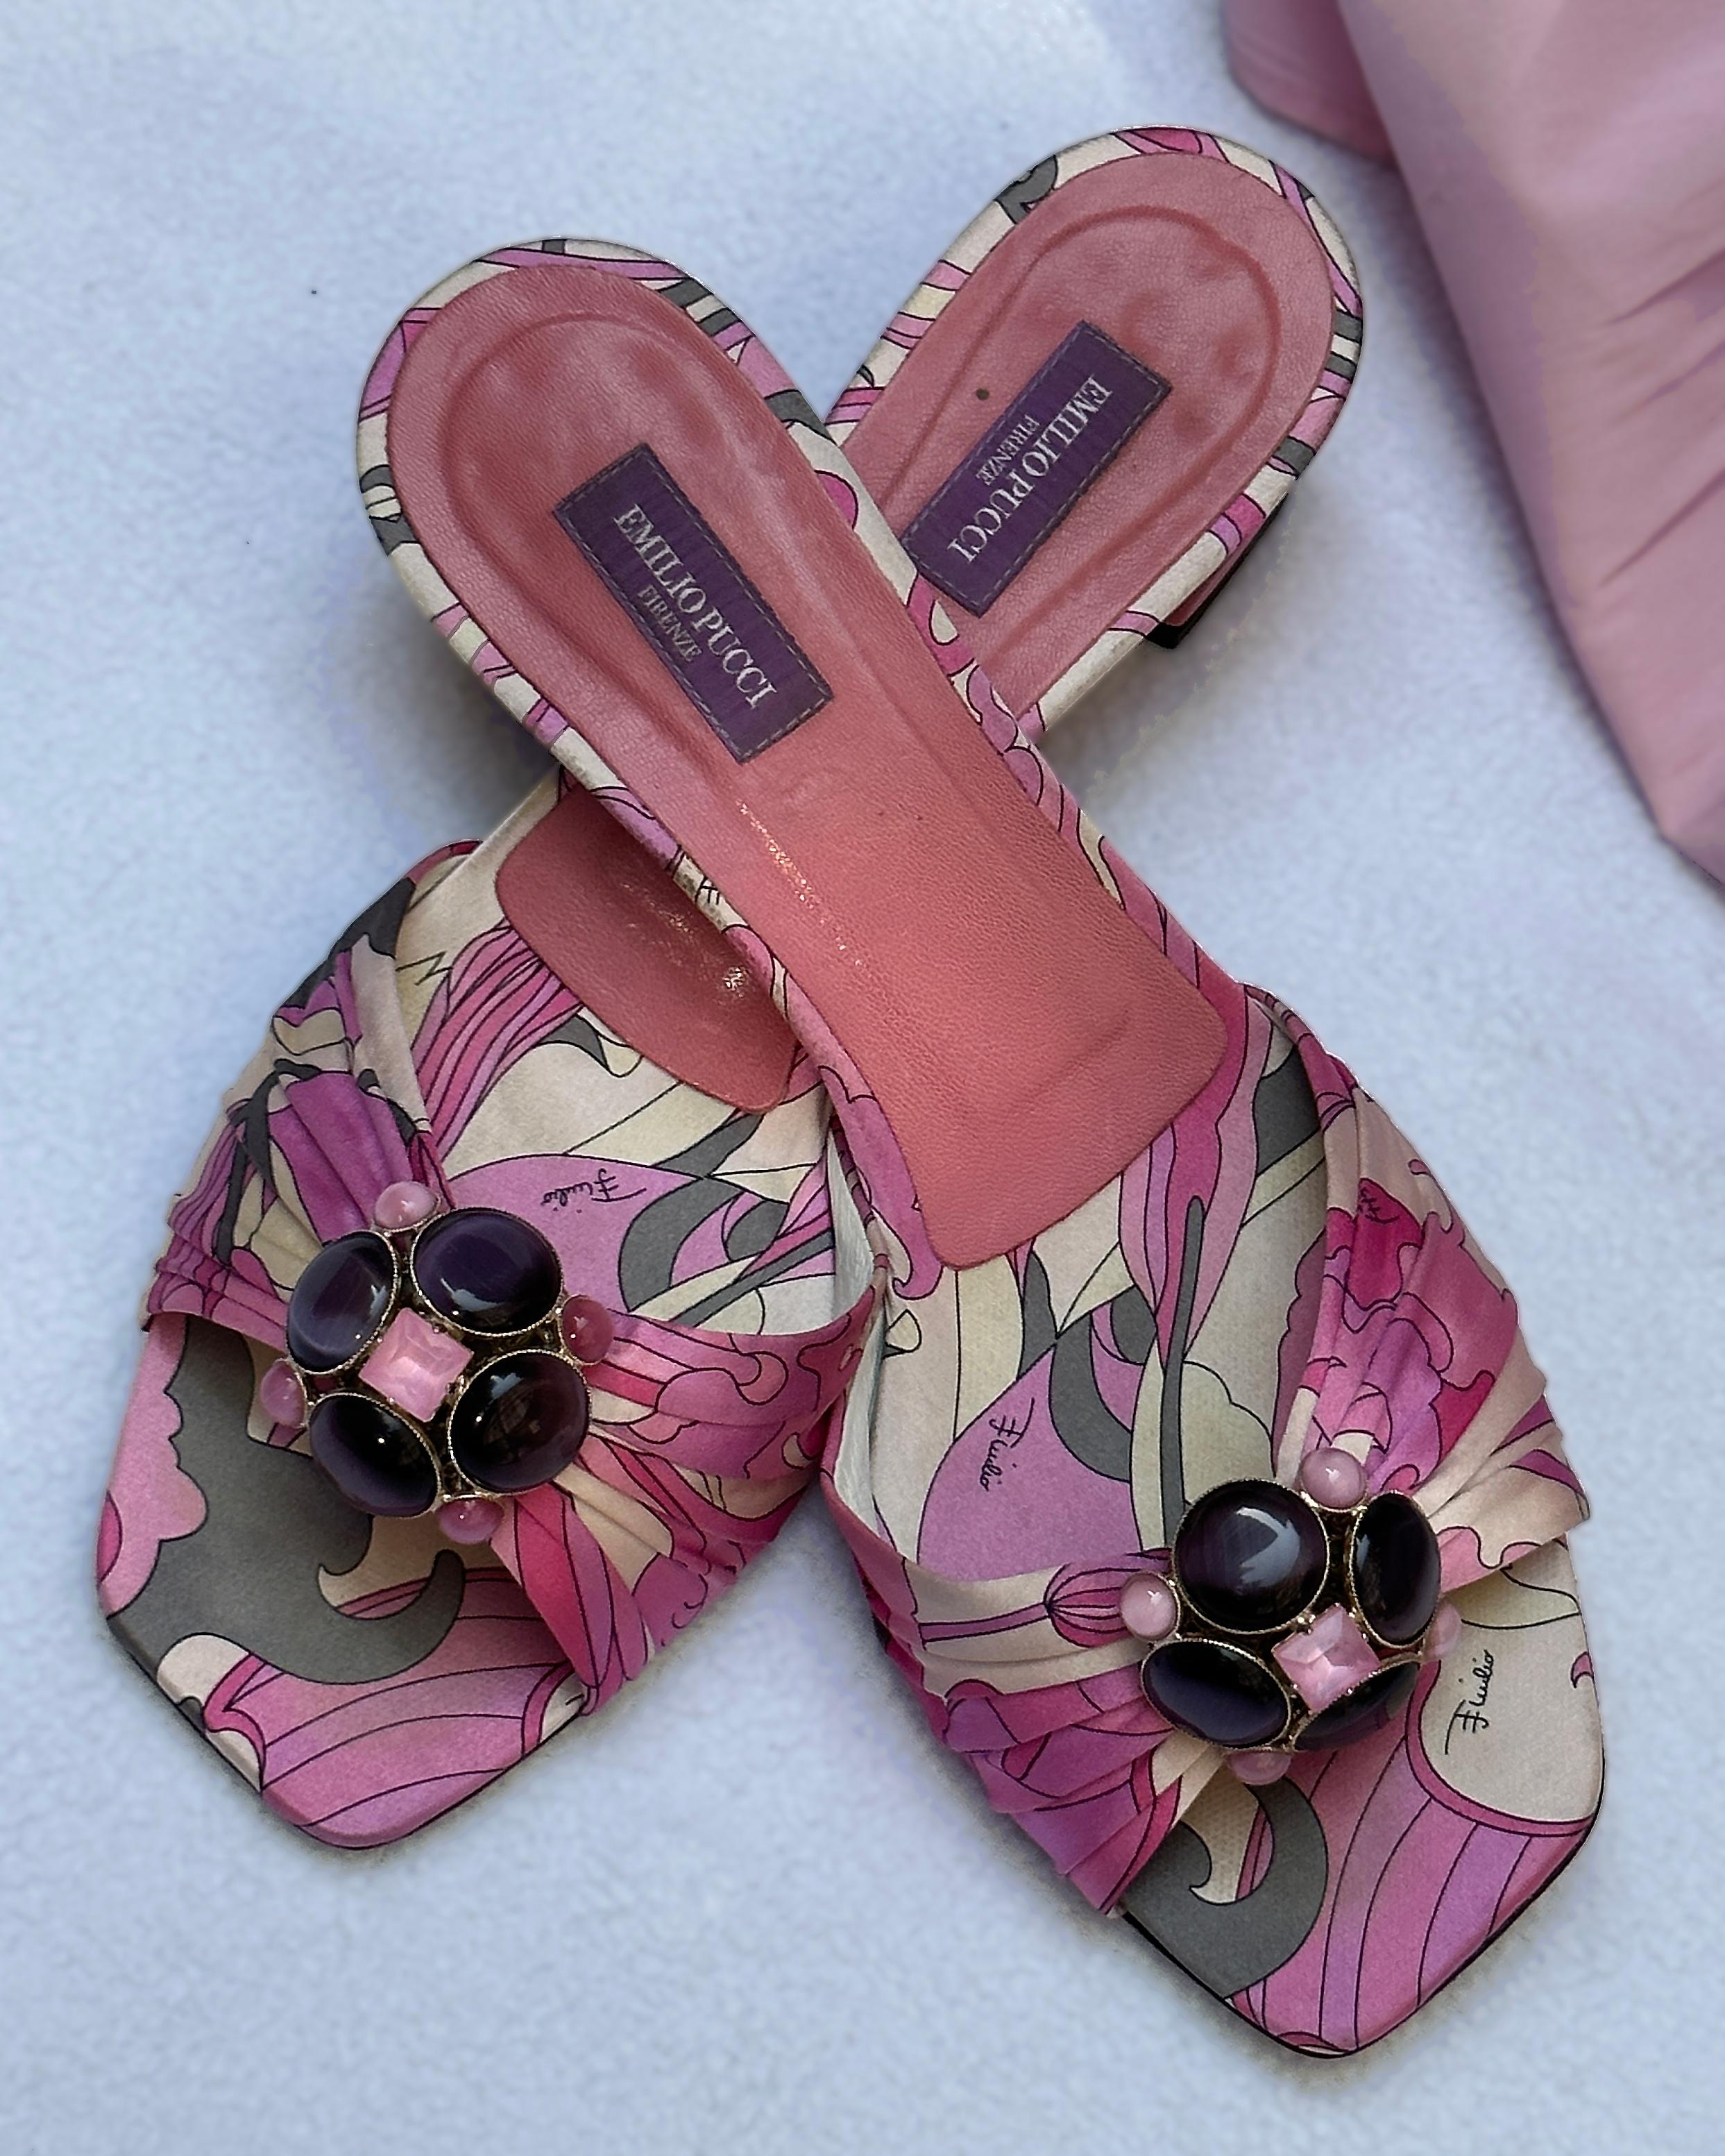 These vintage Emilio Pucci slides transport you to a Slim Aarons photograph of Capri in the late 1960s. They're crafted of satin in a signature Pucci print, featuring vibrant shads of pink, purple, grey, and ivory. The gorgeous jewel embellishment